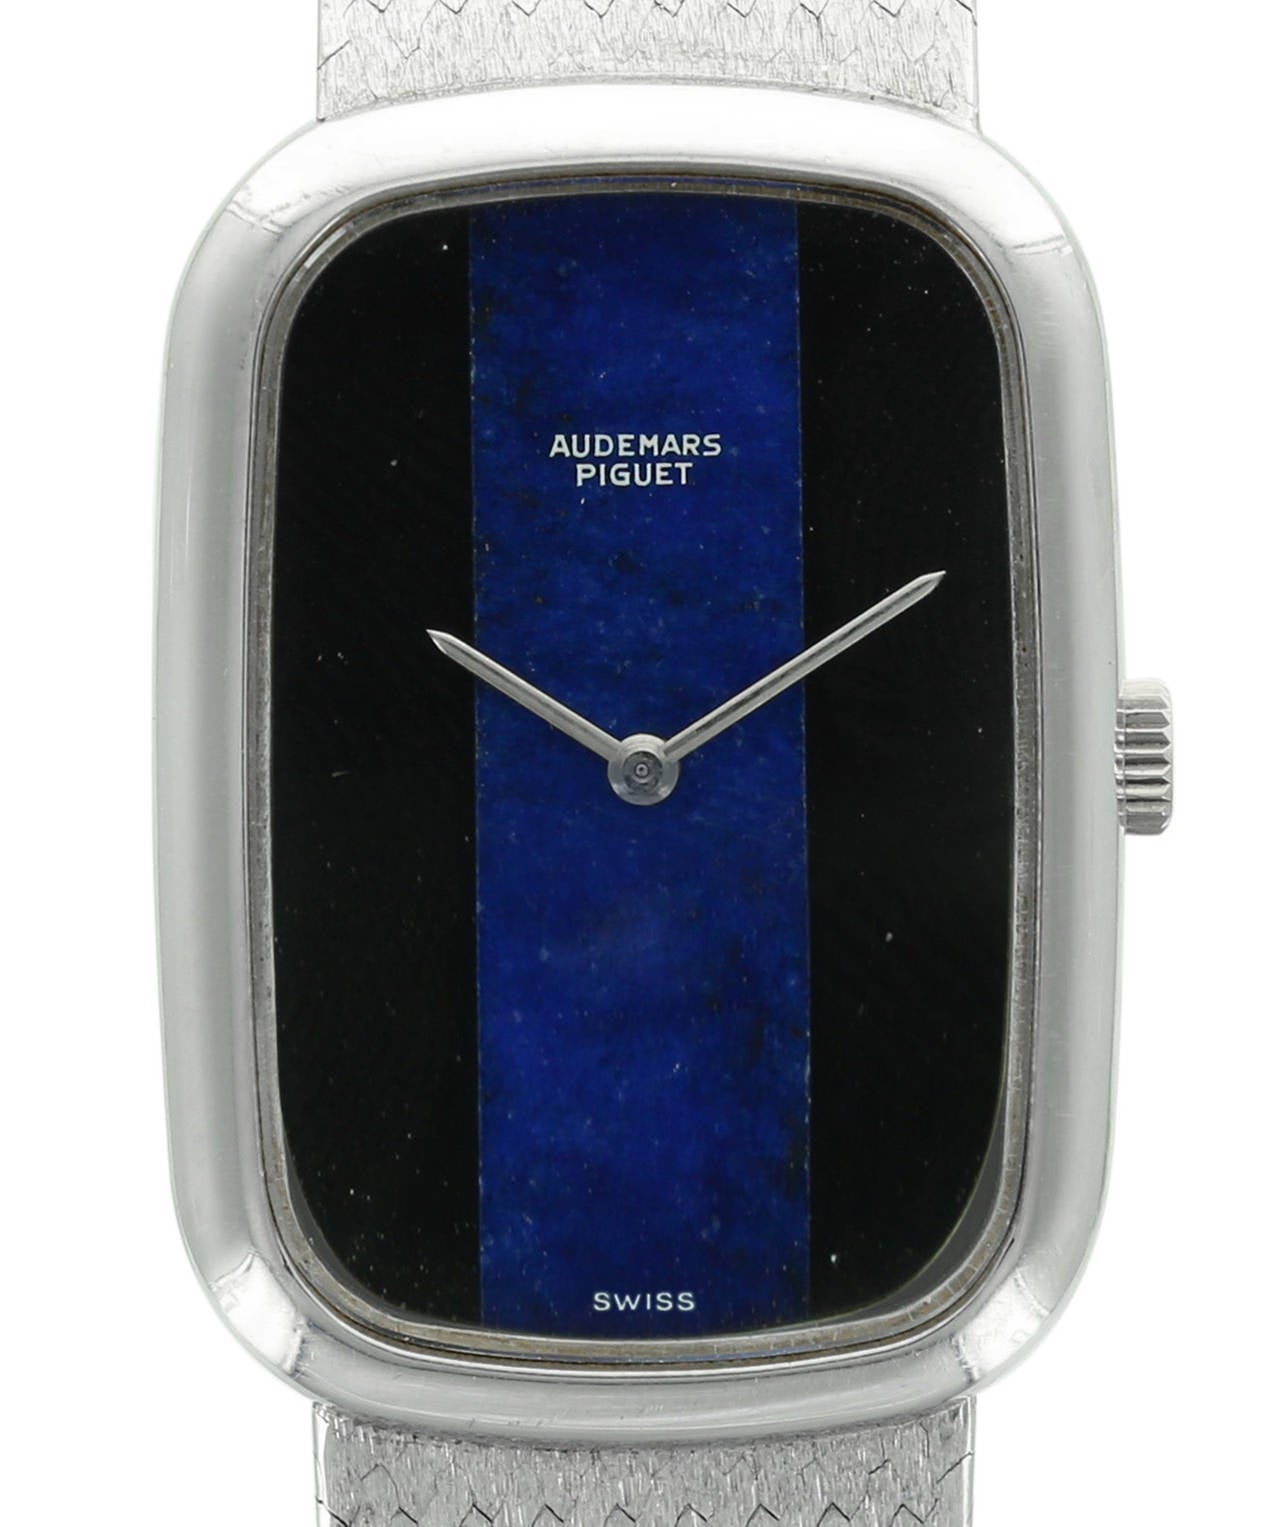 This beautiful Audemars Piguet ladies watch features a stunning Lapis Lazuli and Onyx dial, a smooth, comfortable white gold band and a low profile case. It is truly an elegant women's watch.